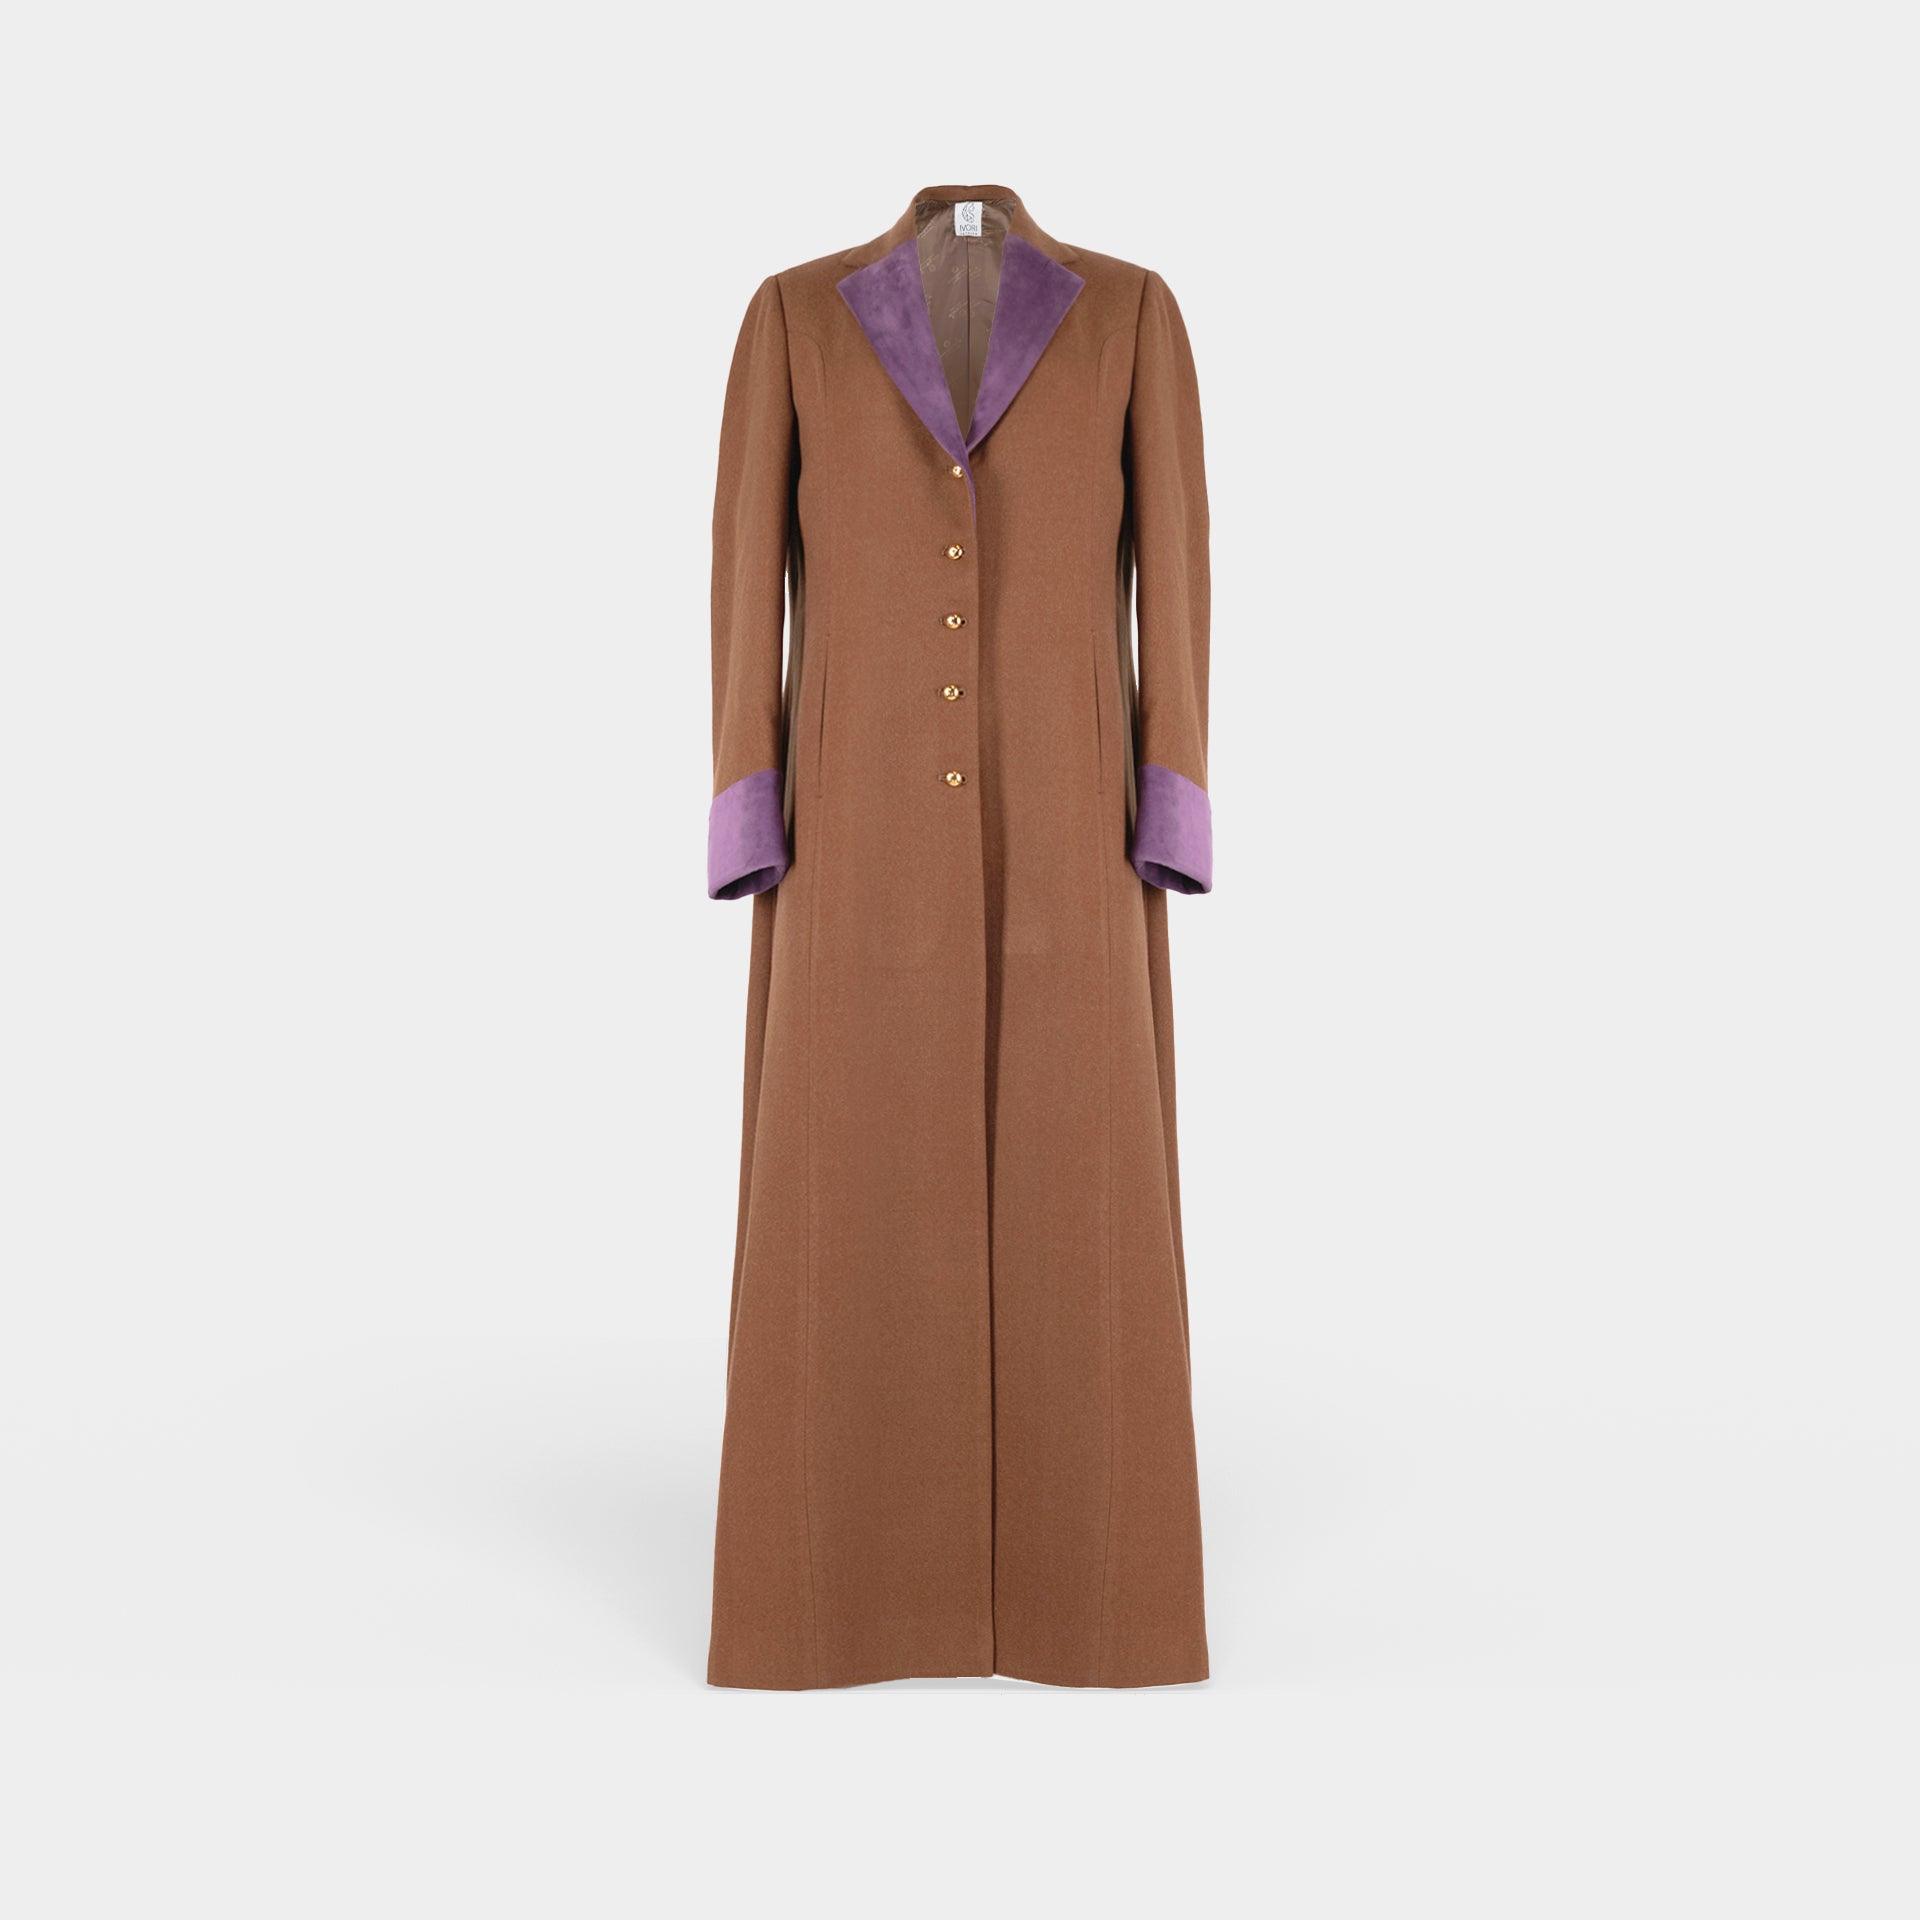 BROWN AND MAUVE SUIT ABAYA BY IVORI - WECRE8